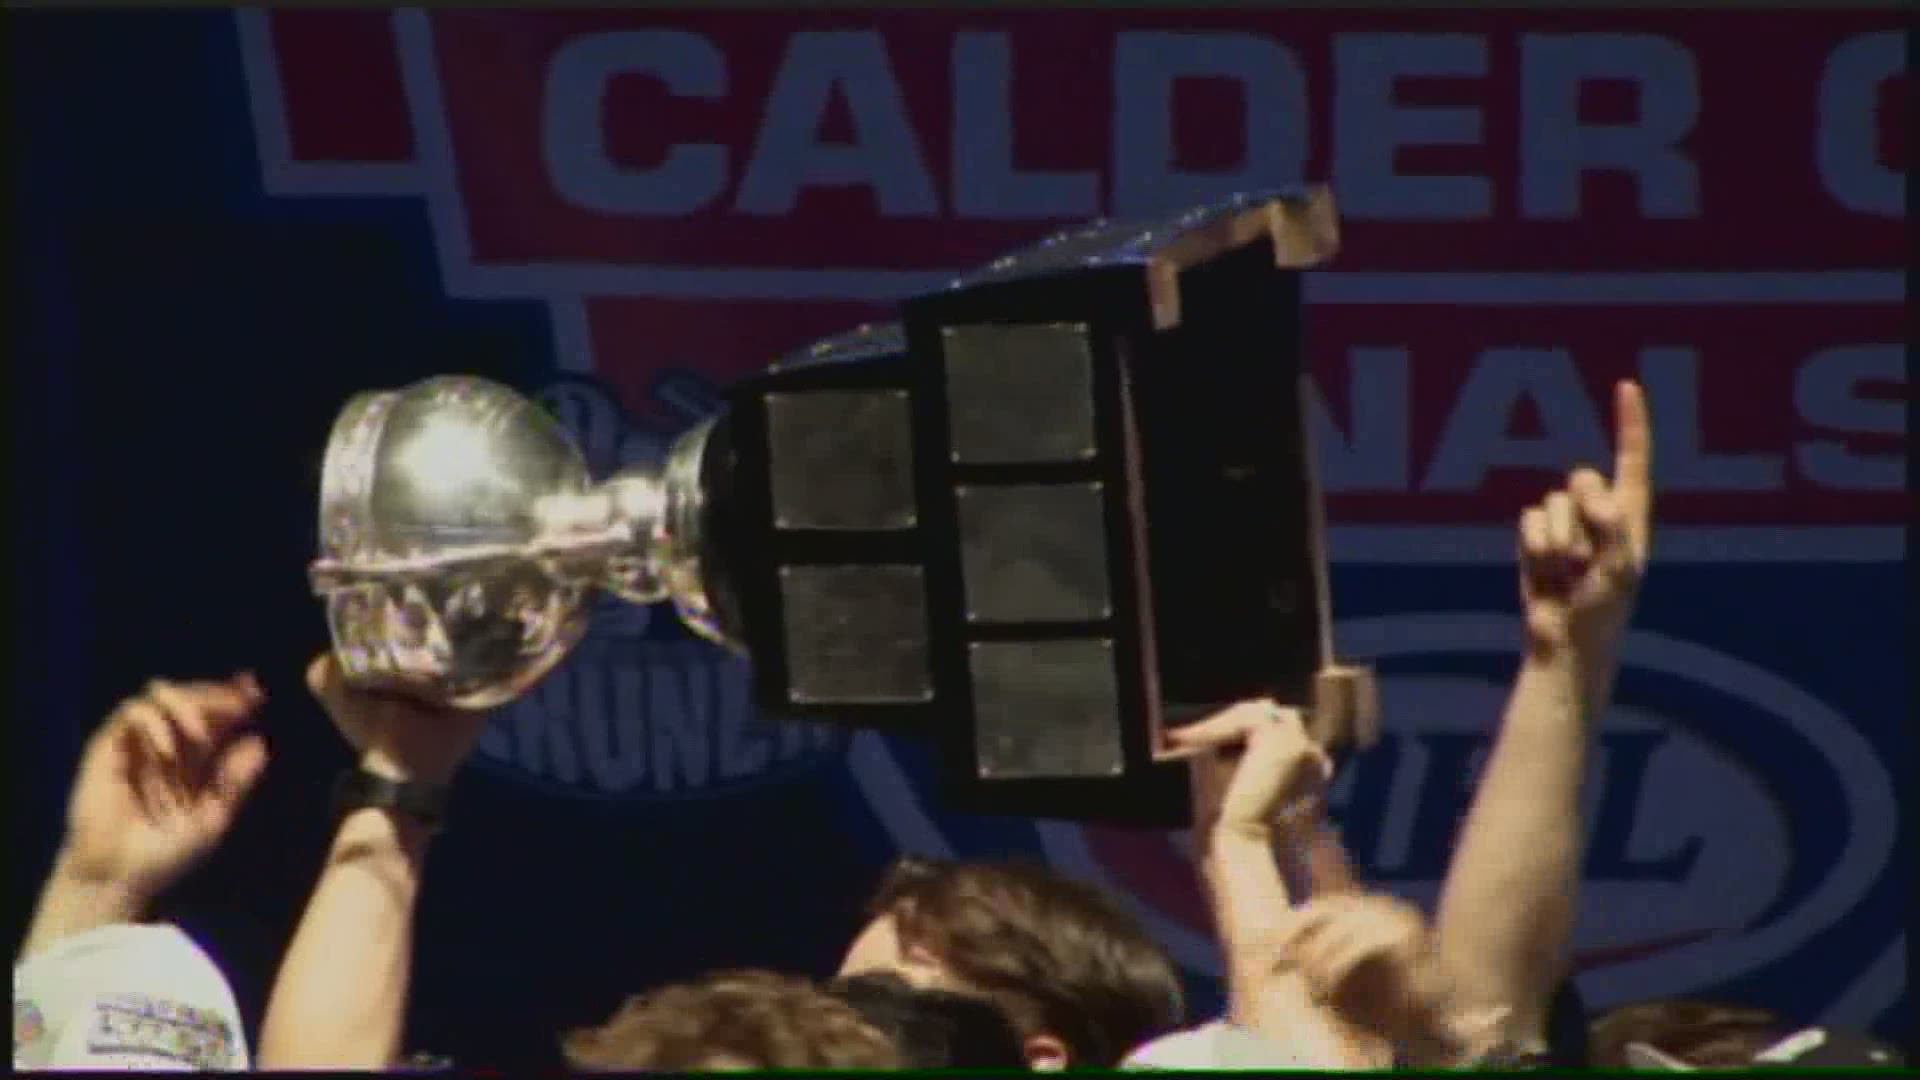 On this day in 2013, the Grand Rapids Griffin's won the Calder Cup for the first time.